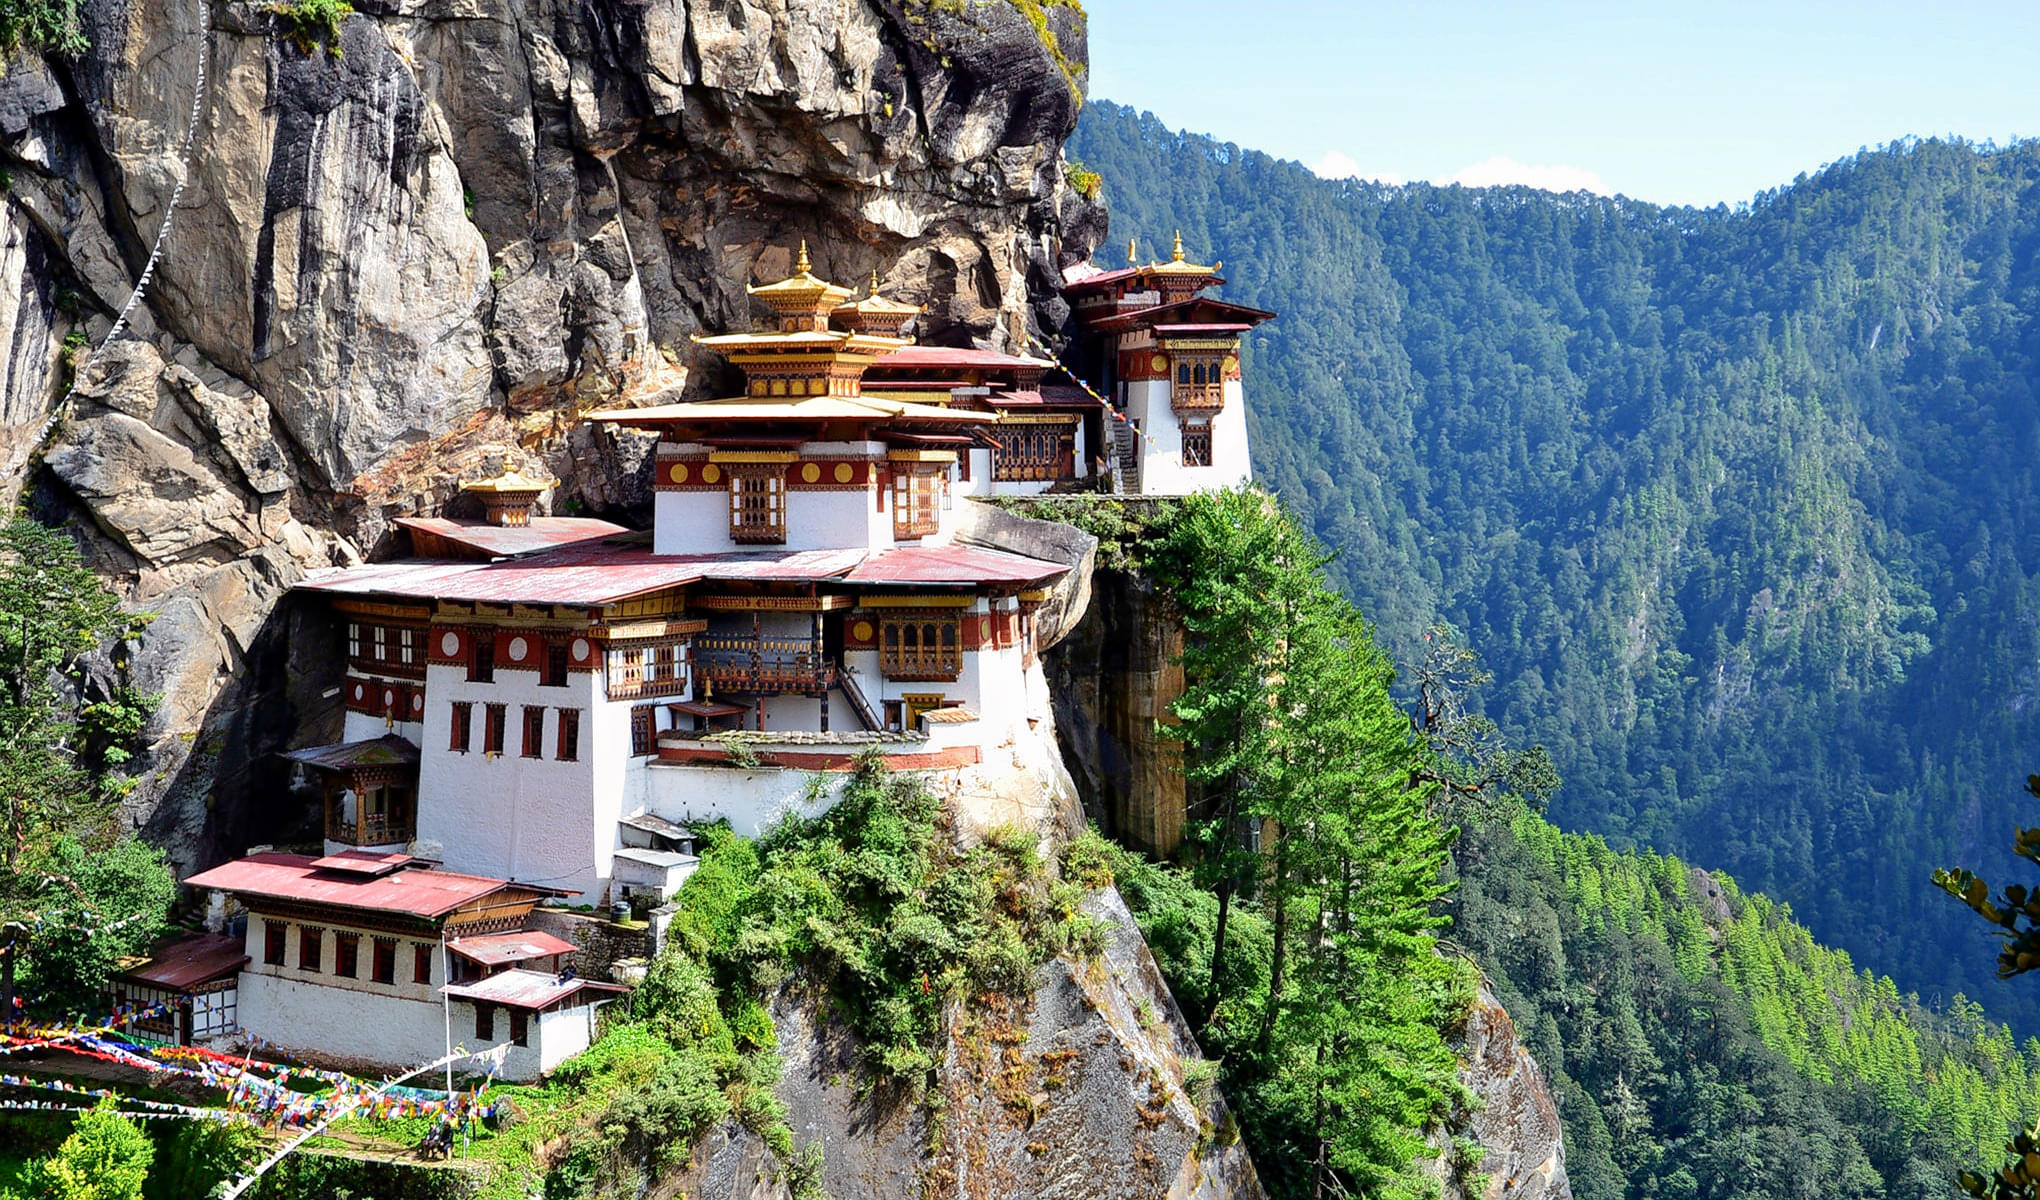 Tiger’S Nest Monastery Overview